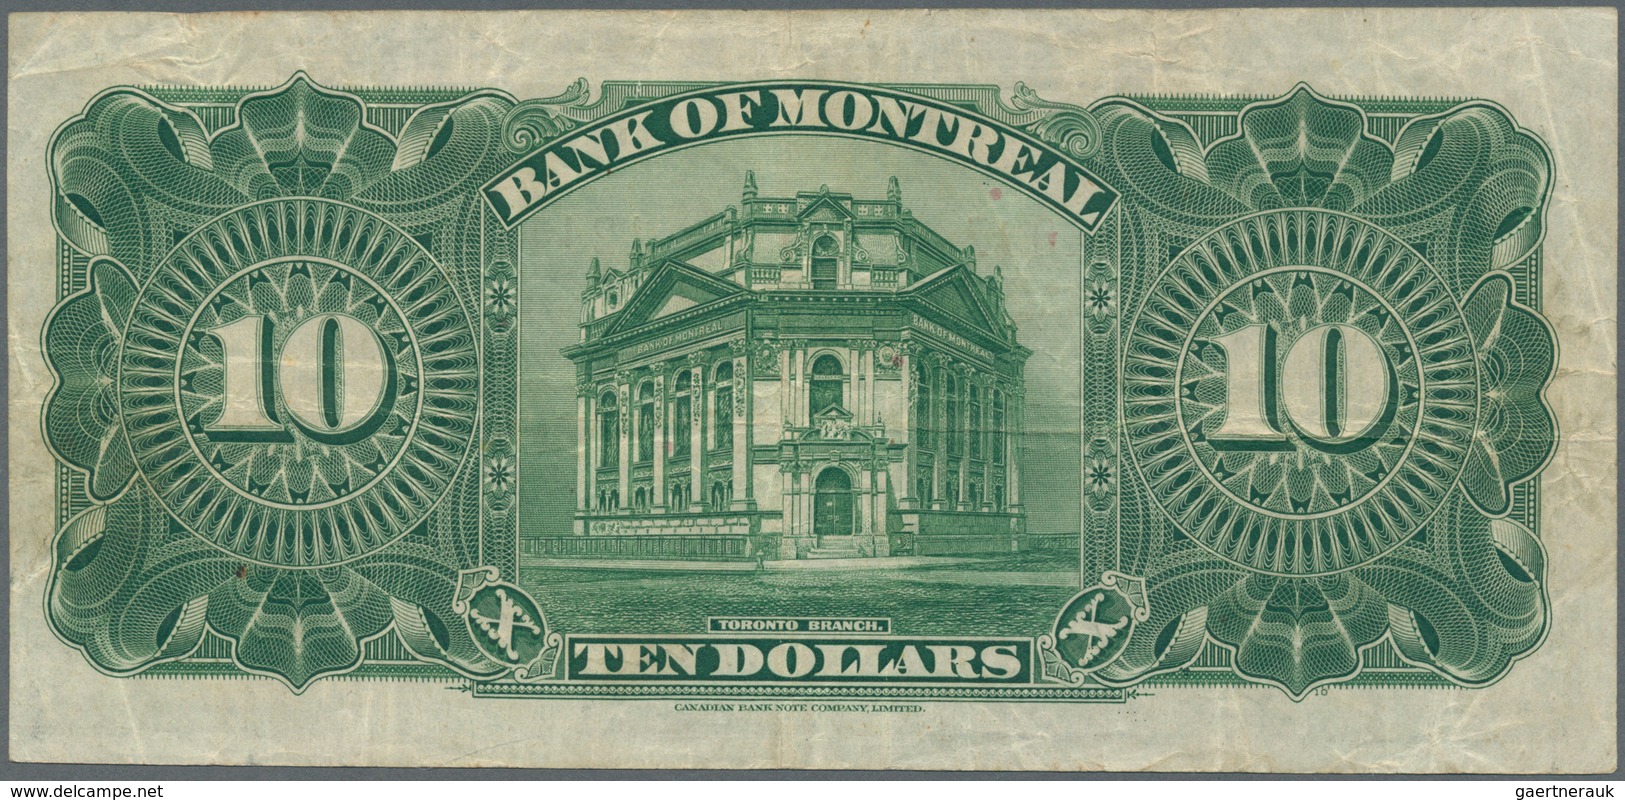 01250 Canada: 10 Dollars 1923 P. S549, In Used Condition With Folds No Holes Or Tears, Condition: F. - Canada